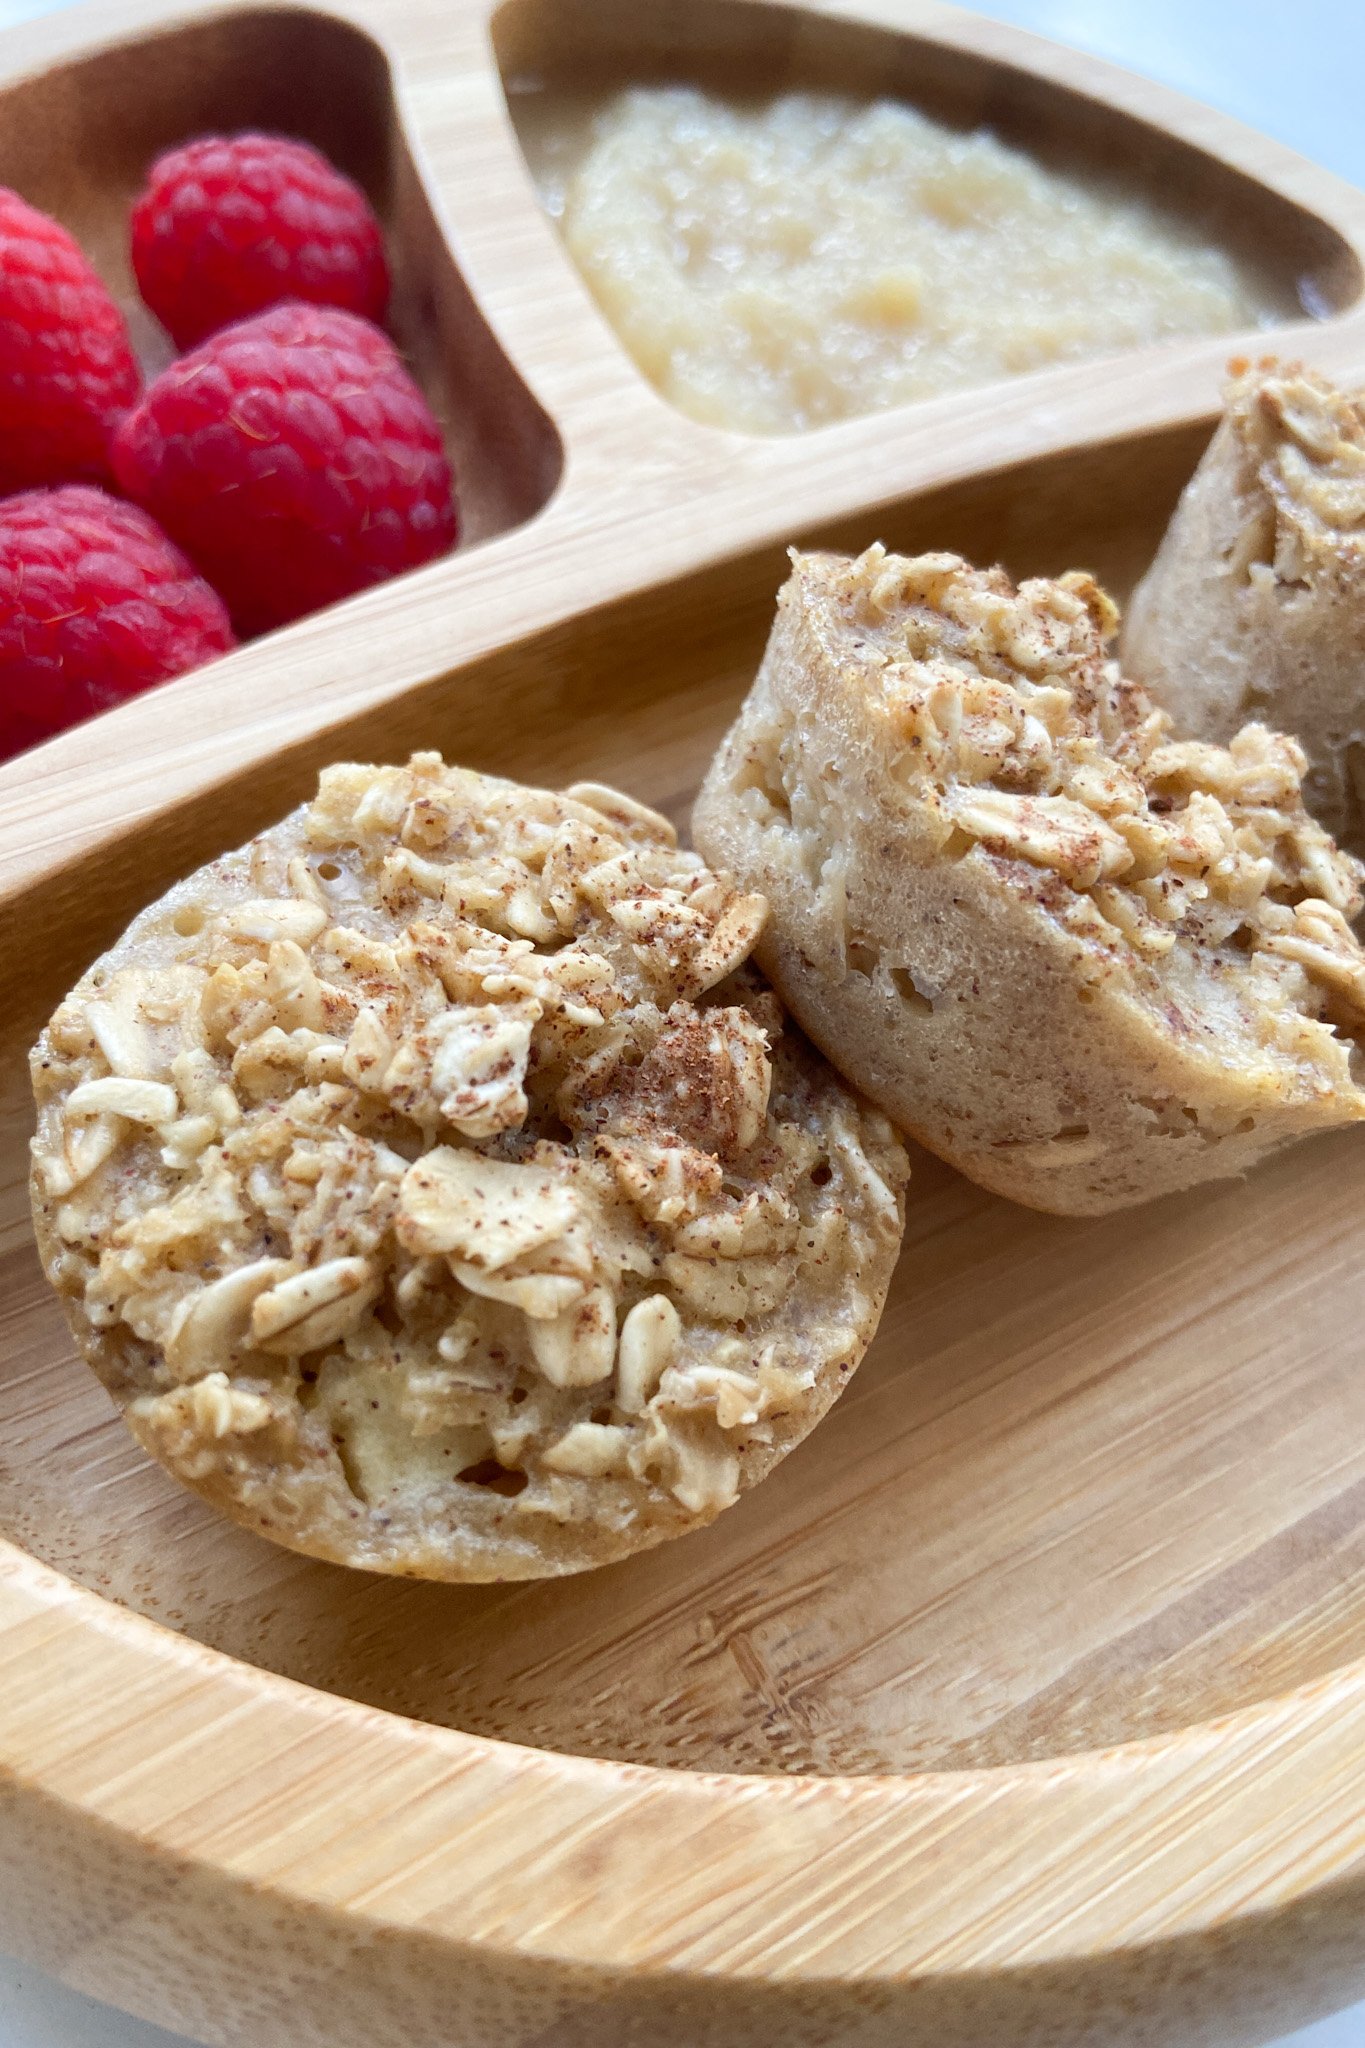 Apple oat bites served with applesauce and raspberries